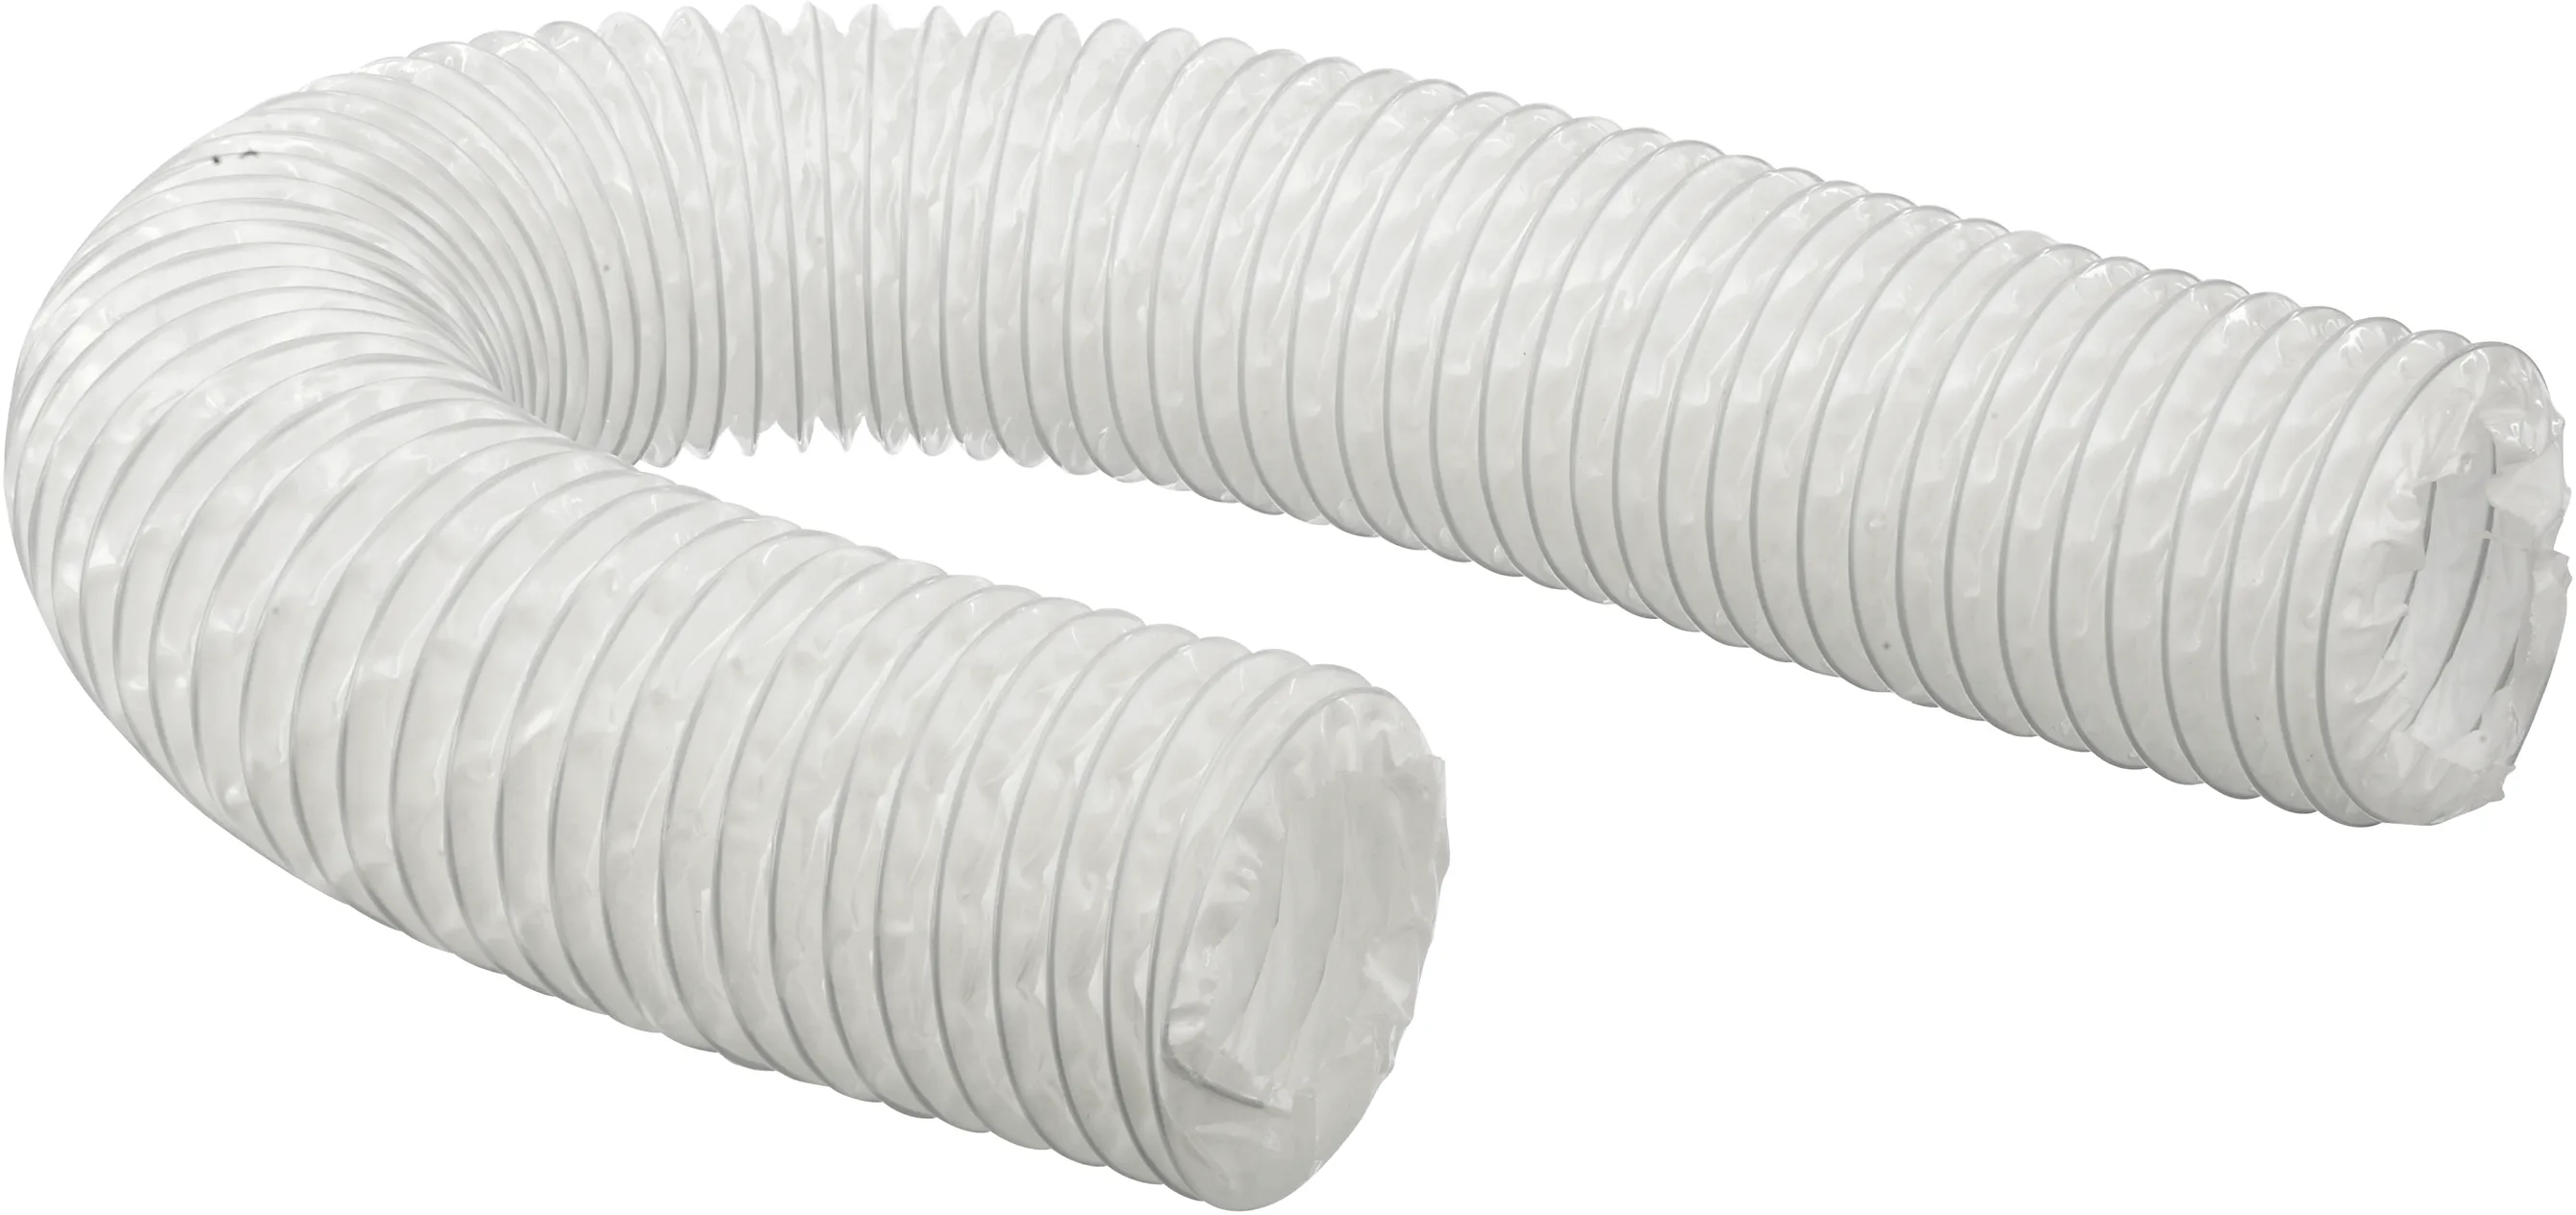 Exhaust air hose For Tumble Dryers 